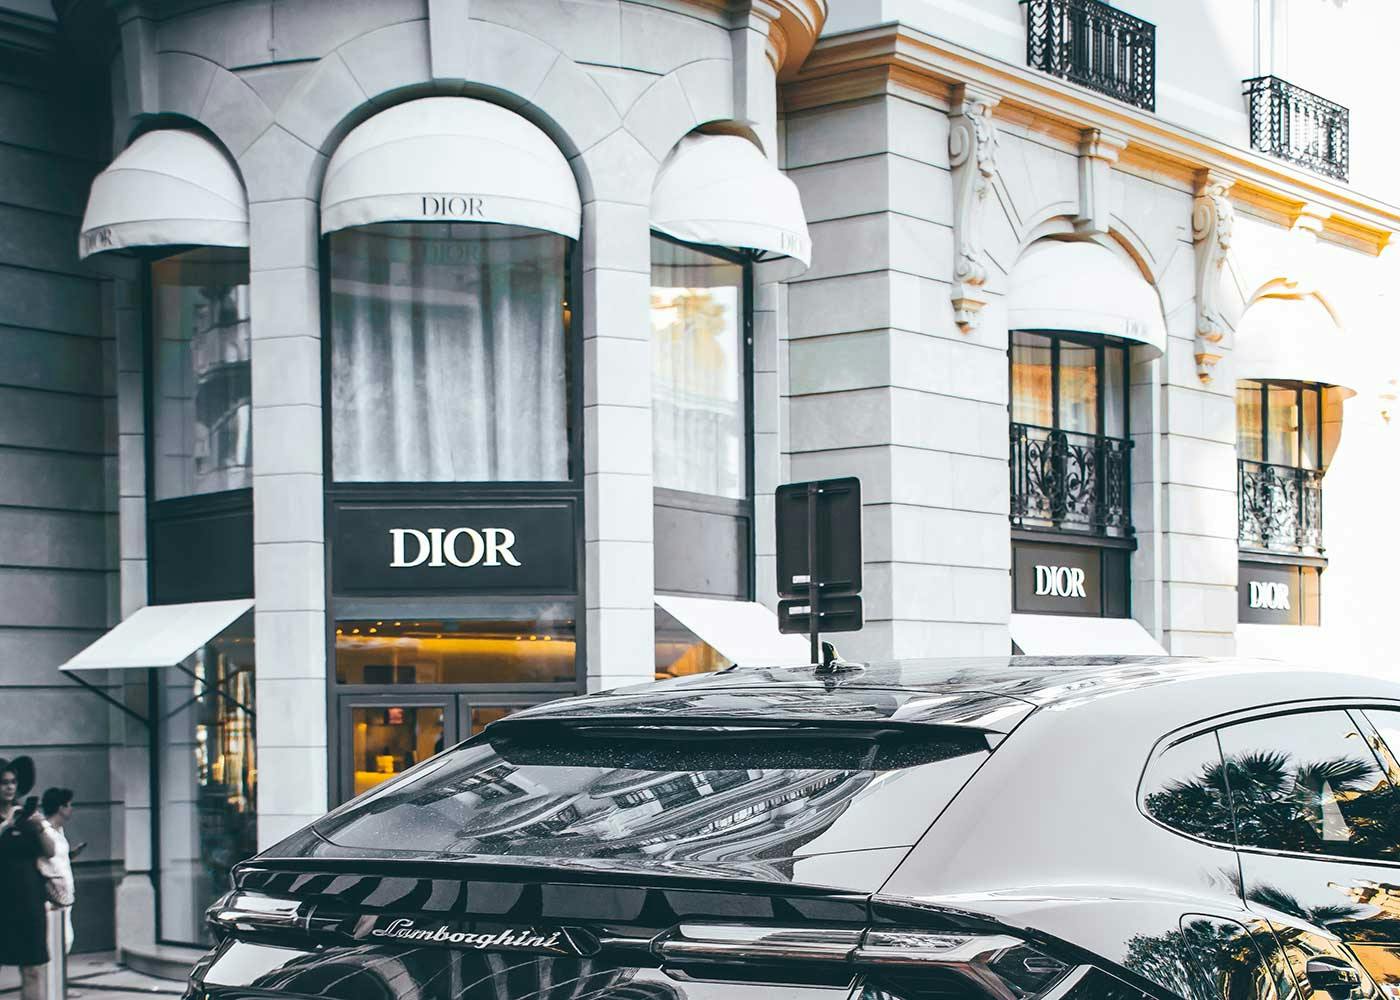 Luxury vehicle driving past Dior